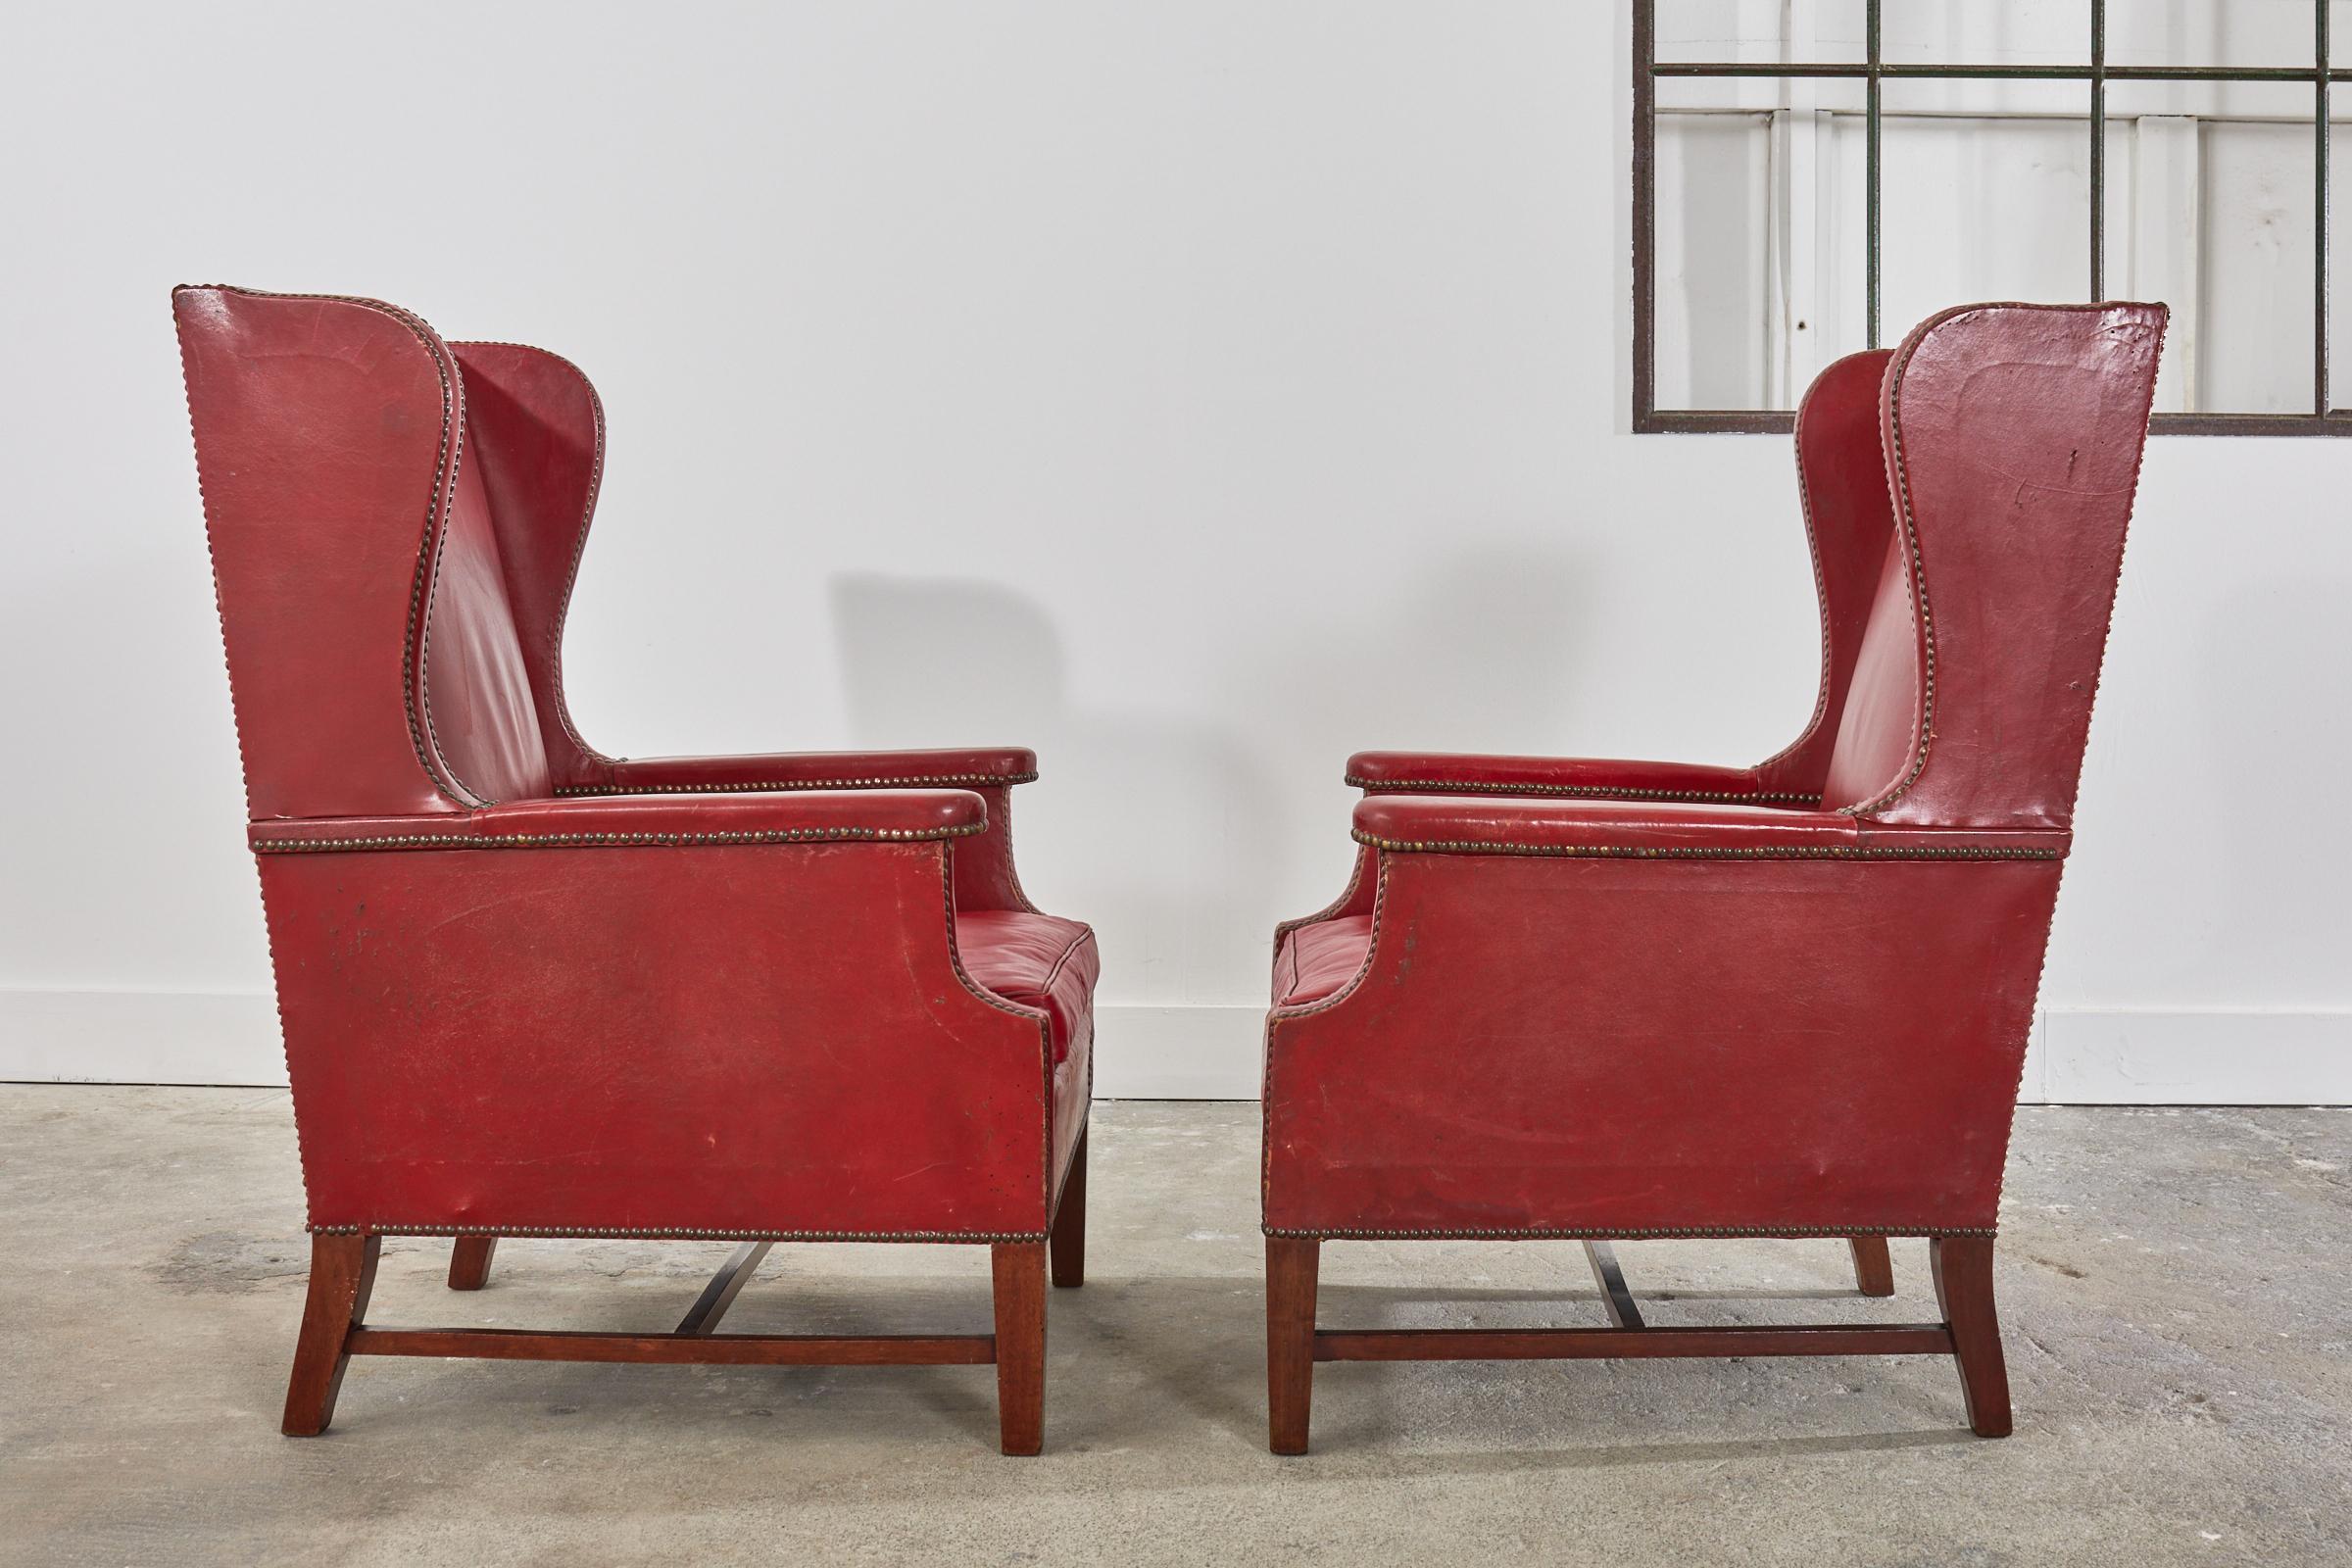 Pair of French Art Deco Cherry Red Leather Wingback Chairs For Sale 1